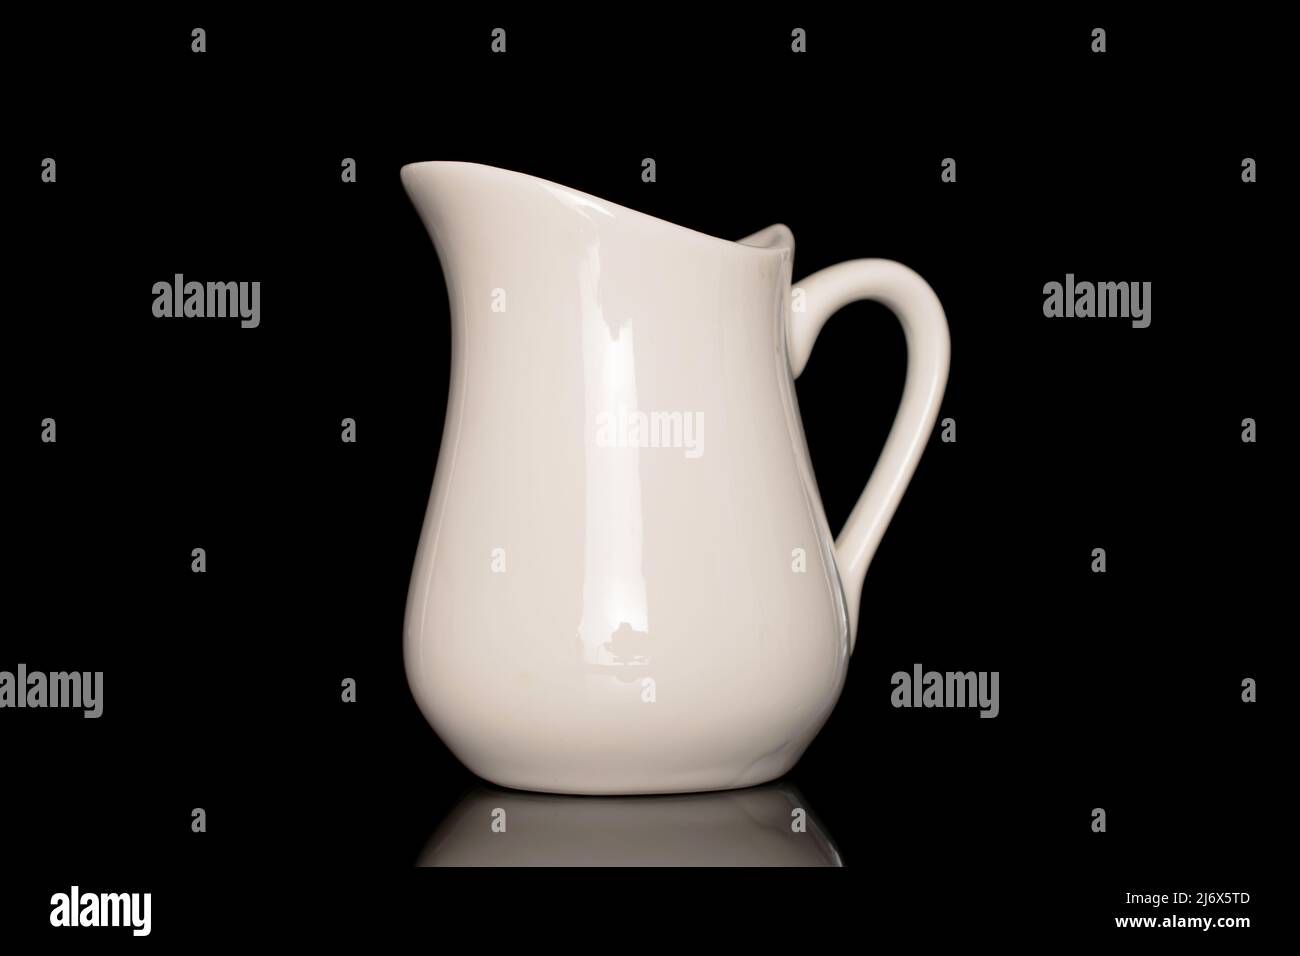 White Ceramic Milk Pot On A White Background Stock Photo, Picture and  Royalty Free Image. Image 50381901.